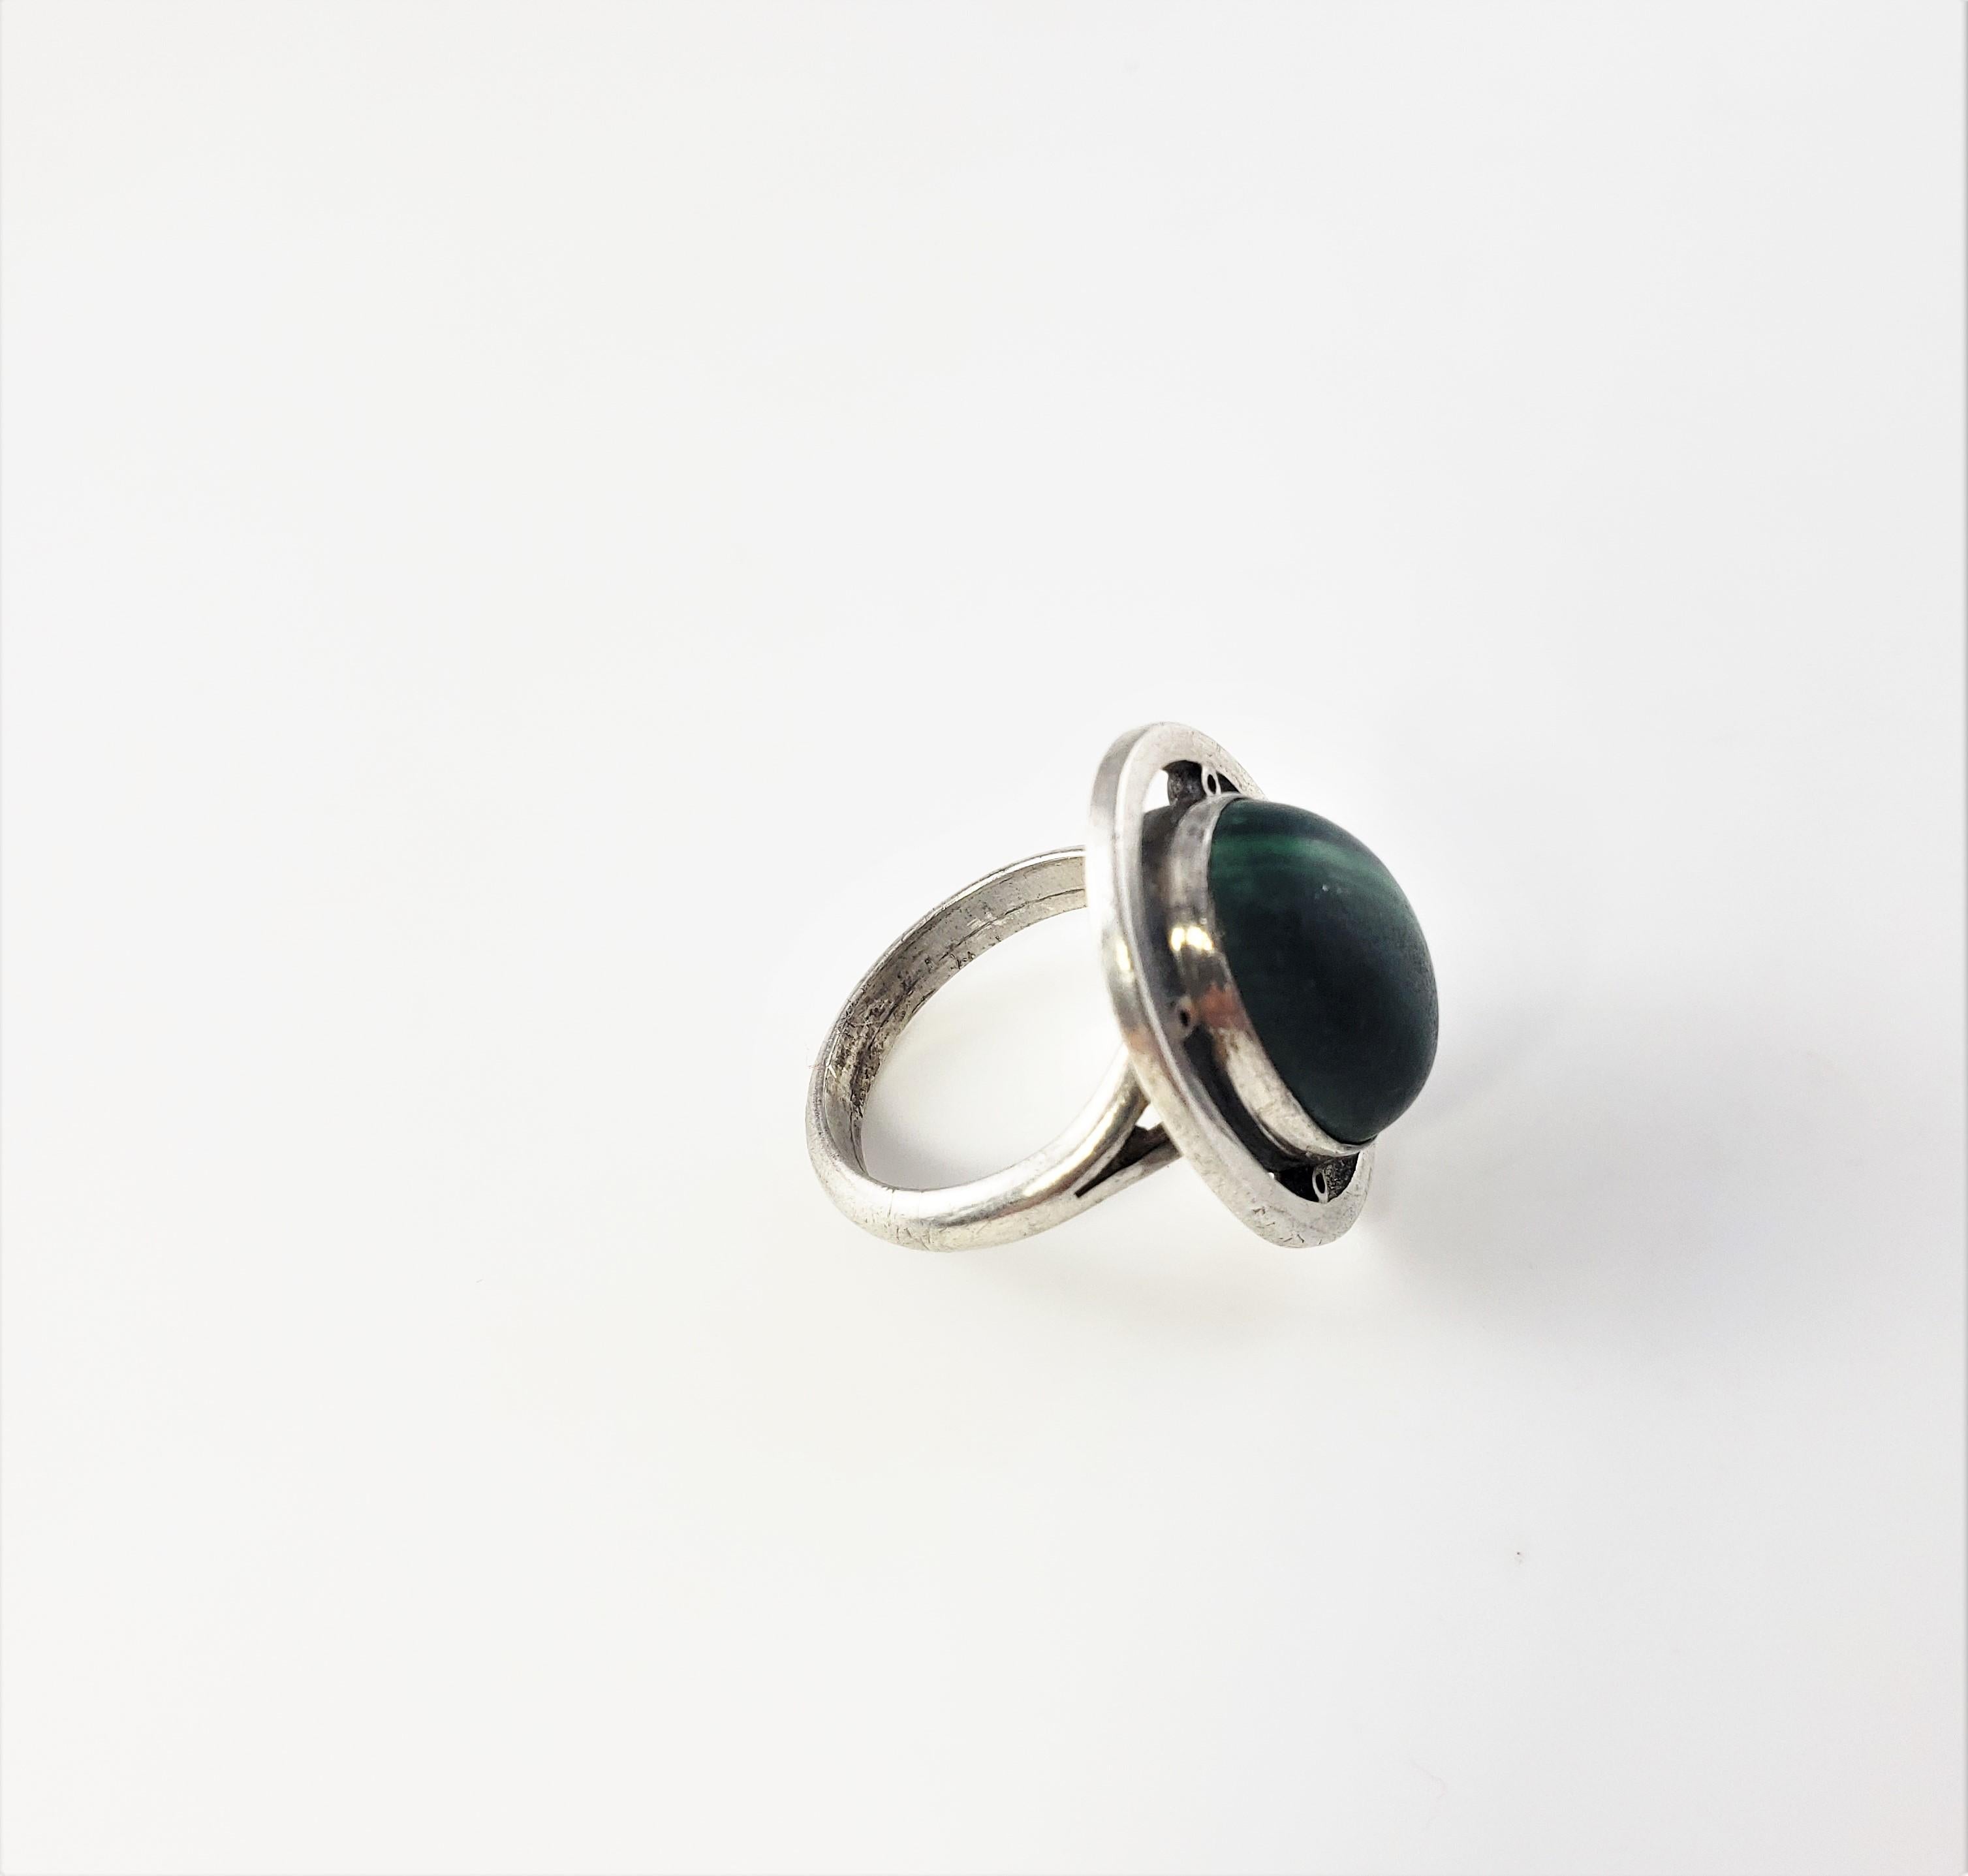 Vintage Mexico Carmen Beckmann Sterling Silver Malachite Ring Size 5.75-

This lovely ring features on oval malachite stone (16 mm x 11 mm x 10 mm) s et in beautifully detailed sterling silver. Top of ring measures 22 mm x 18 mm. Shank measures 3